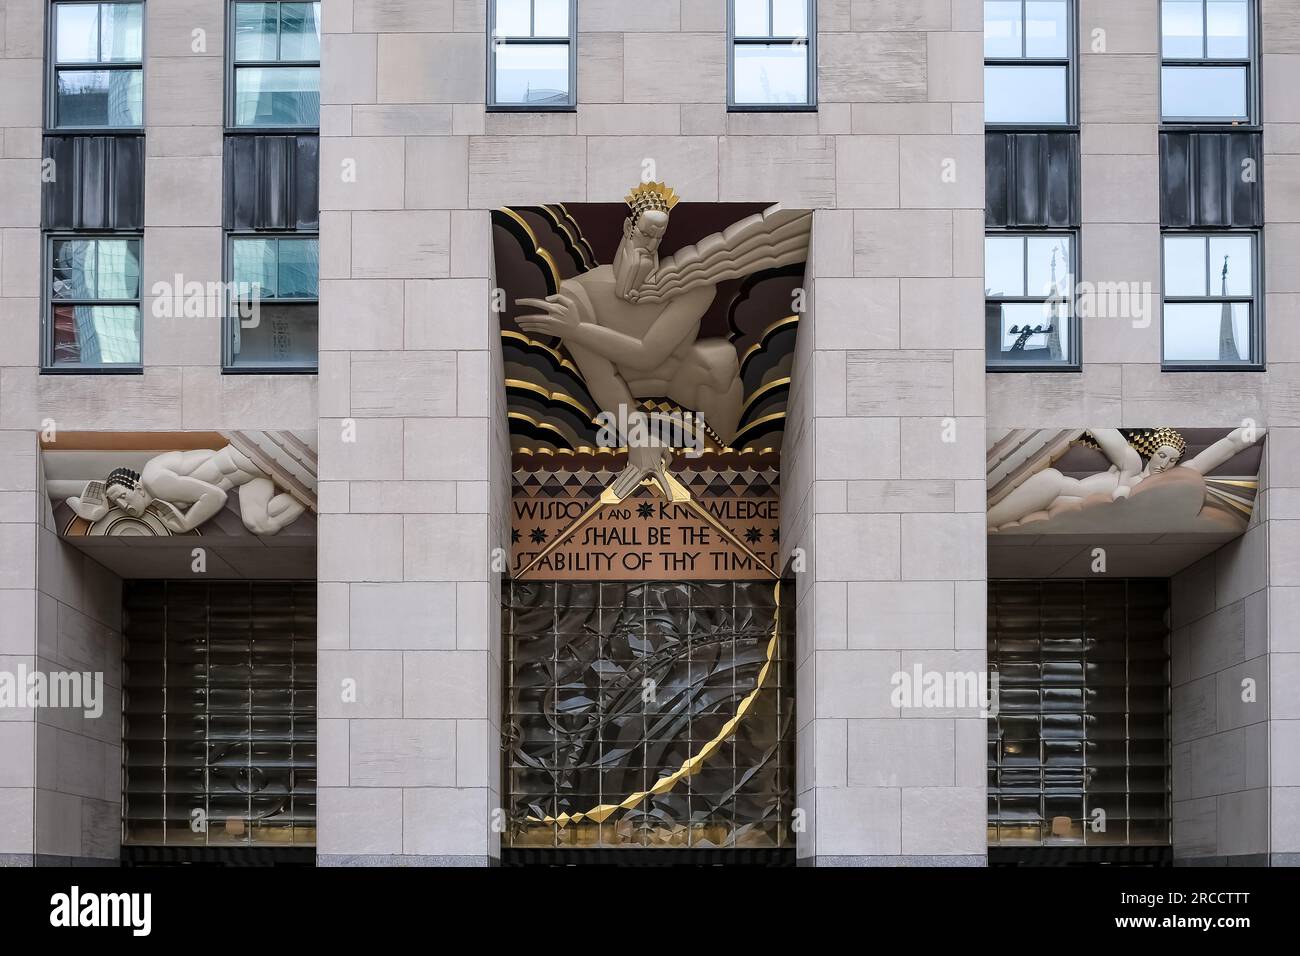 Architectural detail of Rockefeller Center, a large complex consisting of 19 commercial buildings in the Midtown Manhattan neighborhood, New York City Stock Photo